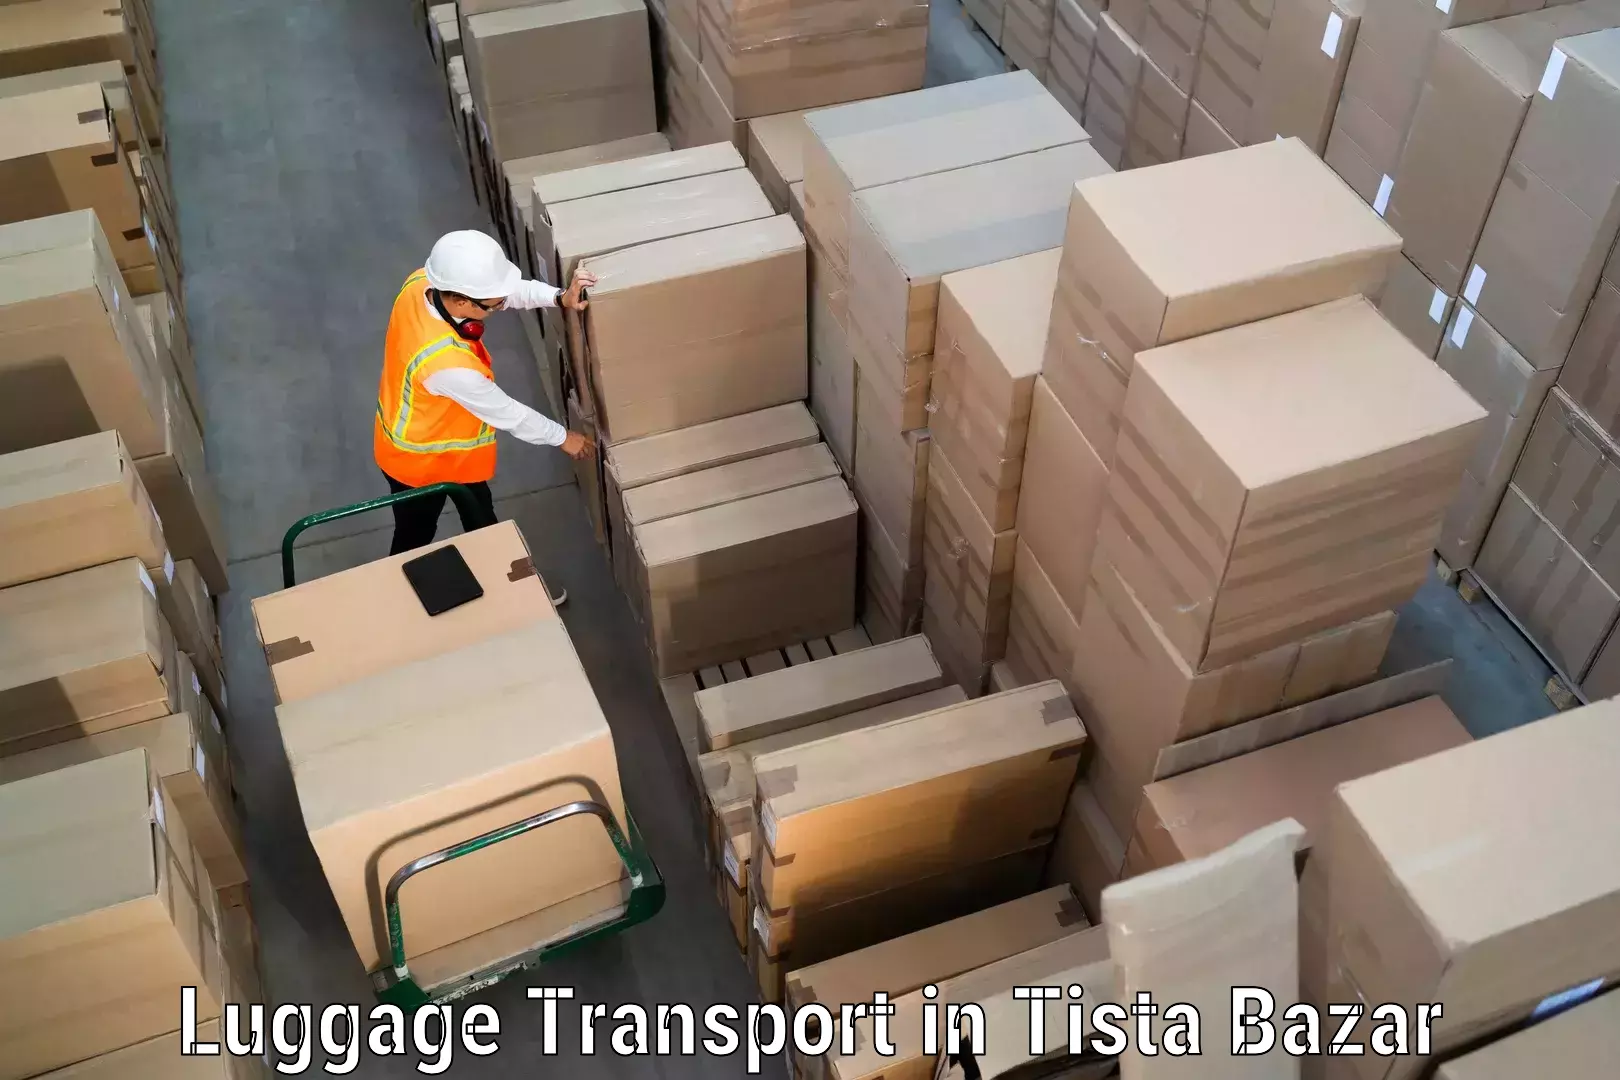 Luggage delivery system in Tista Bazar